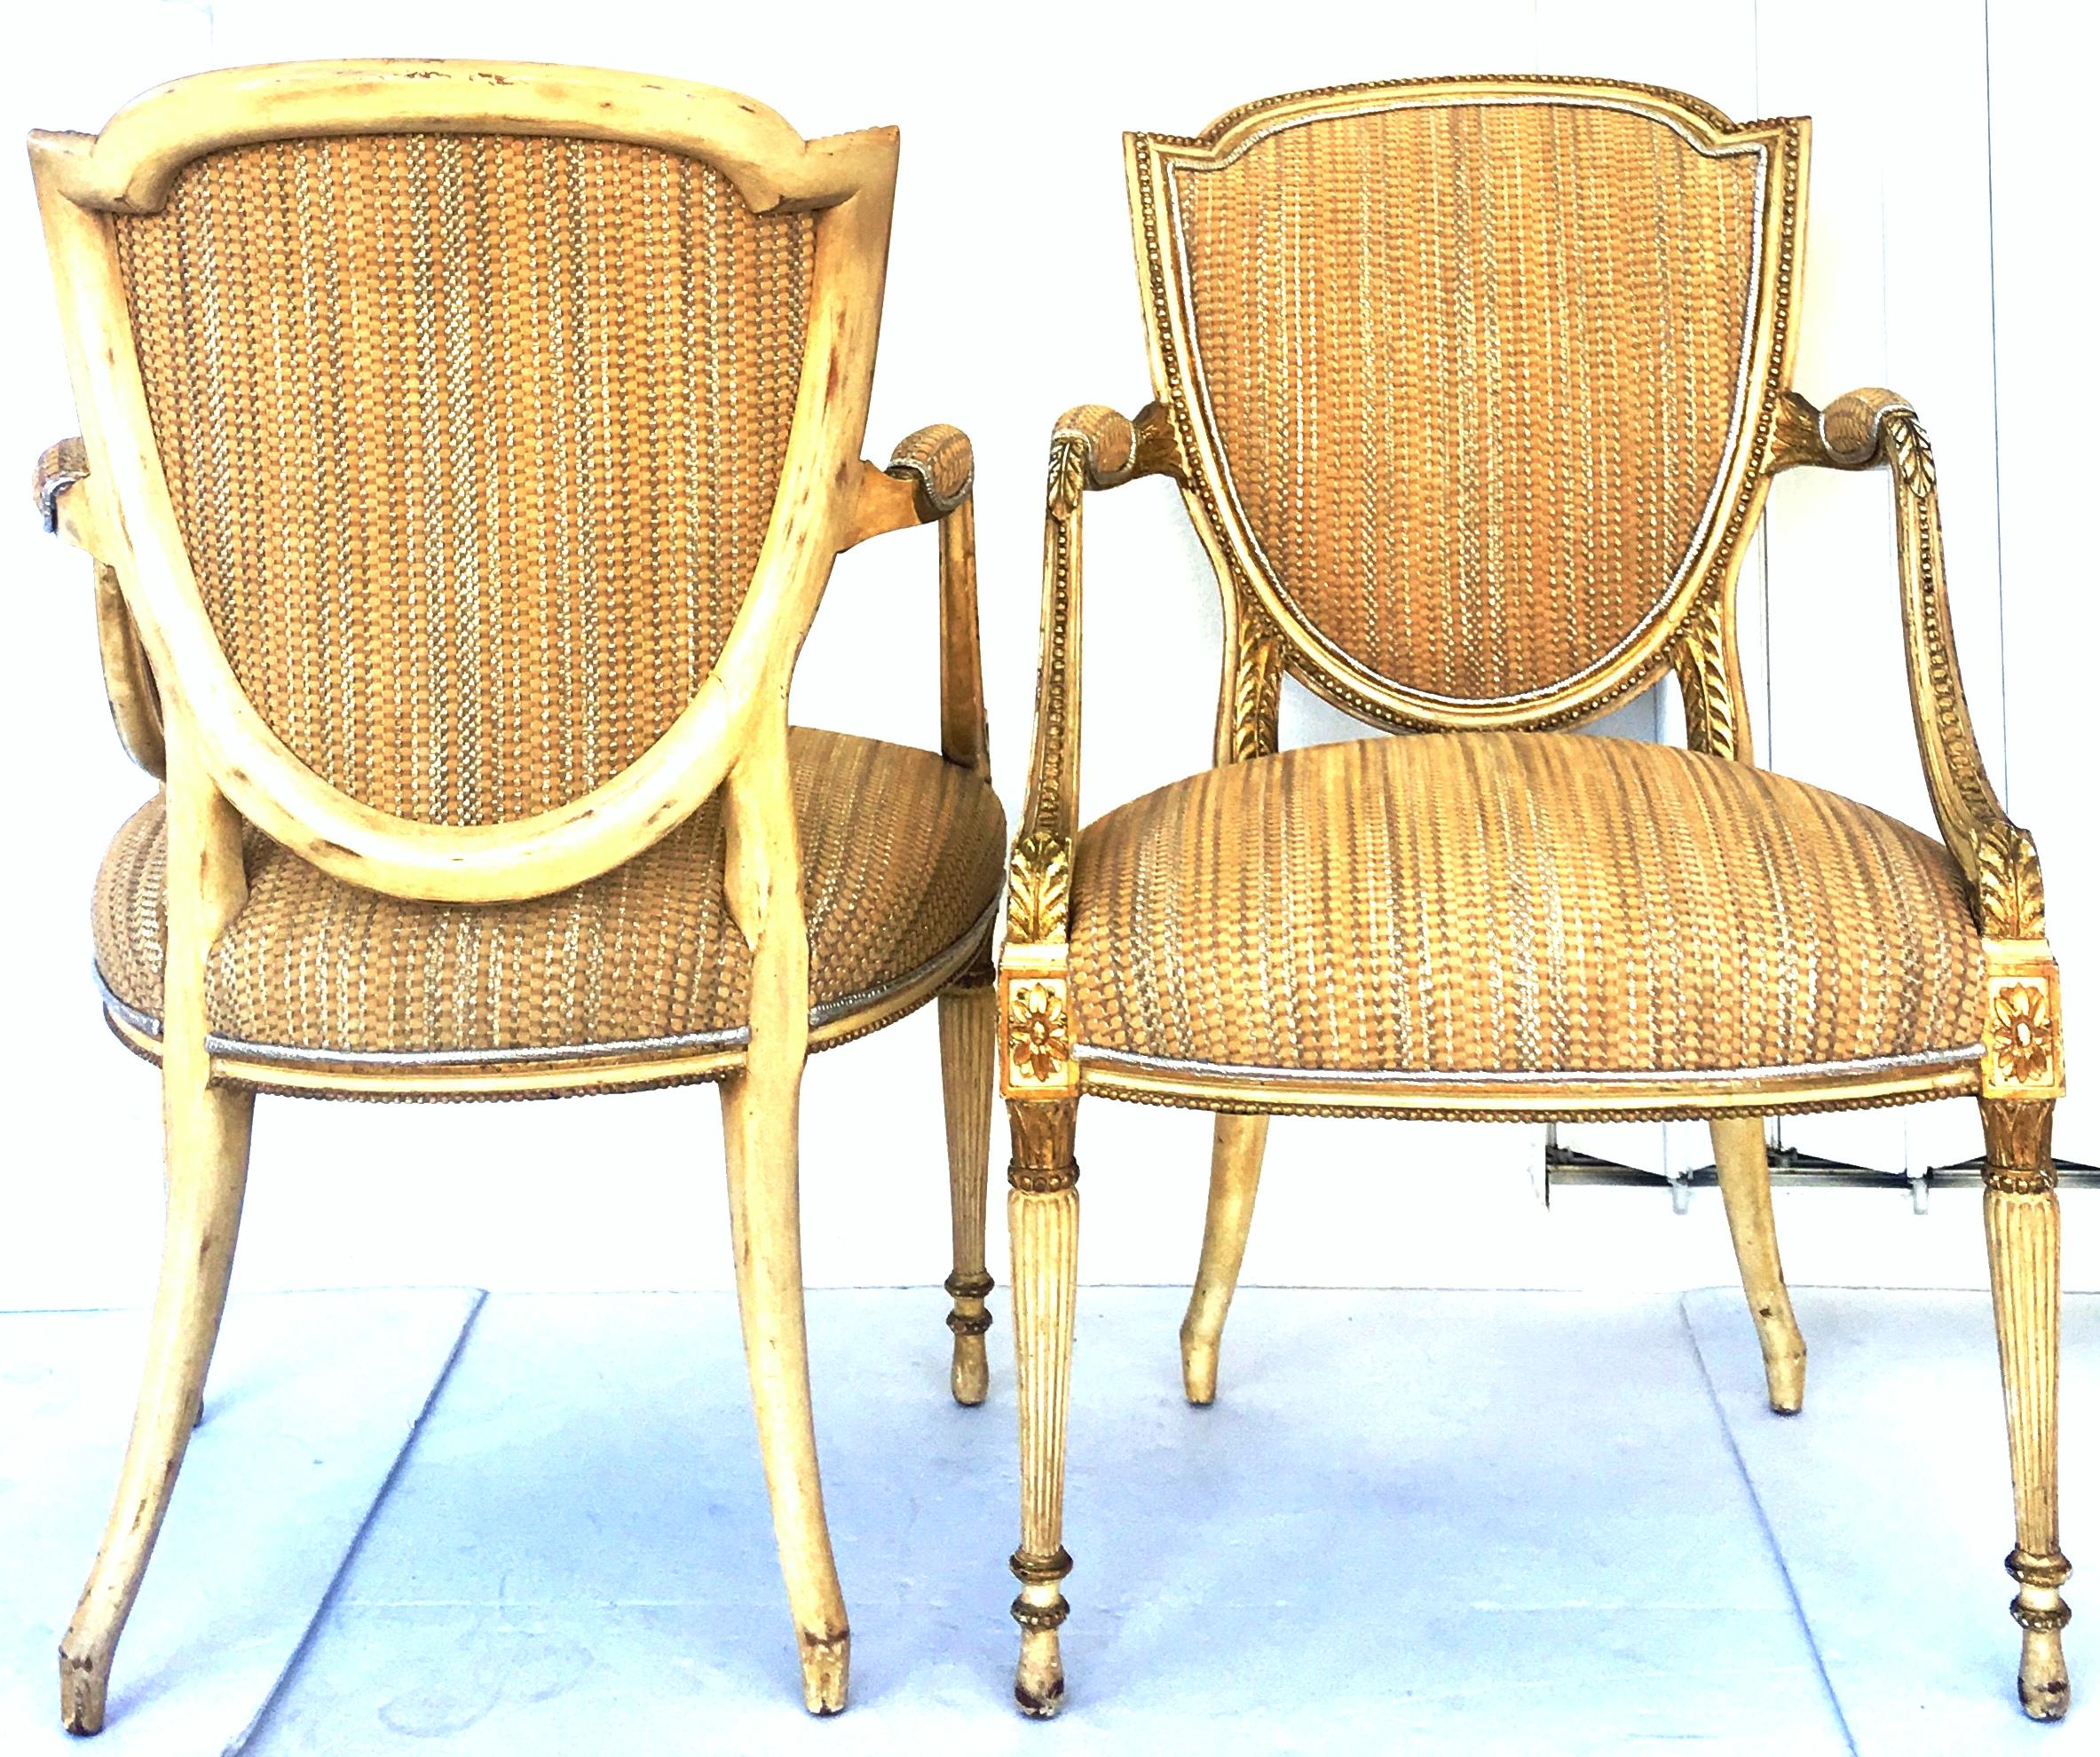 18th century antique fine pair of French Louis XVI Jean Baptiste Claude Sene style, shield back hand carved gilt wood and woven leather upholstered armchairs. Finely crafted chair frames in the manner of Jean Baptiste Clause, hand carved and painted